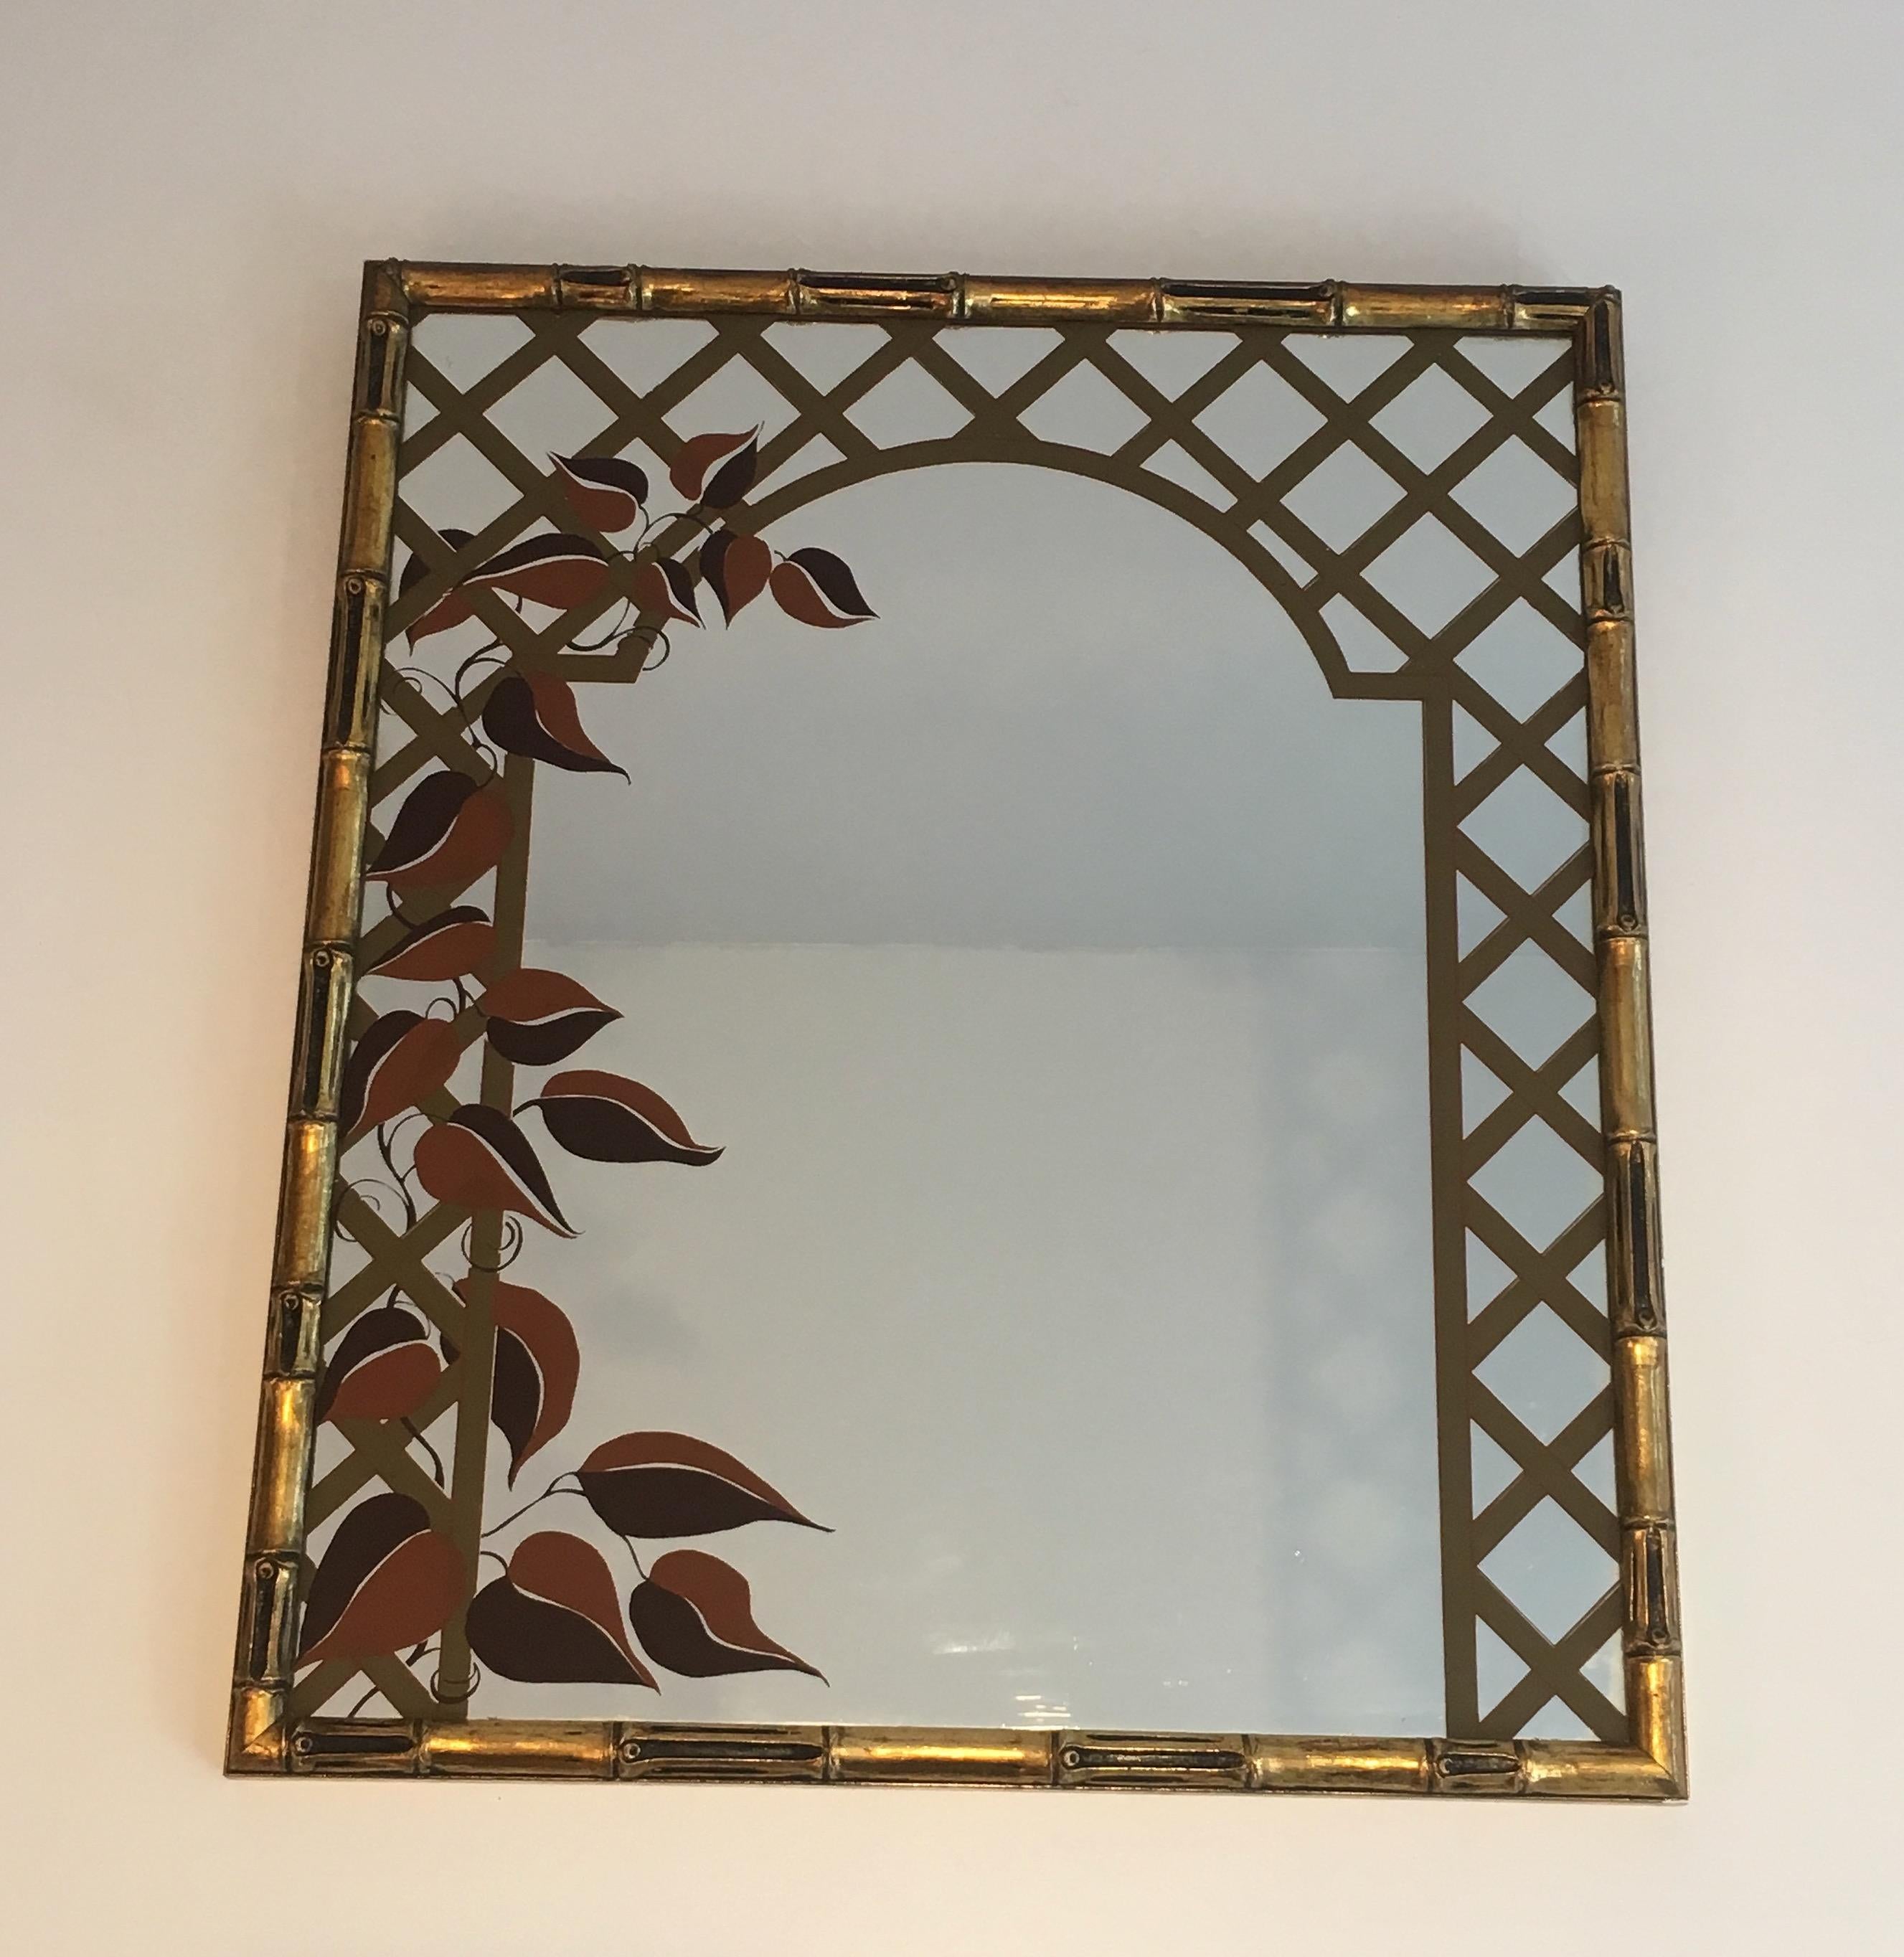 Decorative Faux-Bamboo Gilt Wood Mirror with Printed Floral Decor, Circa 1970 For Sale 4